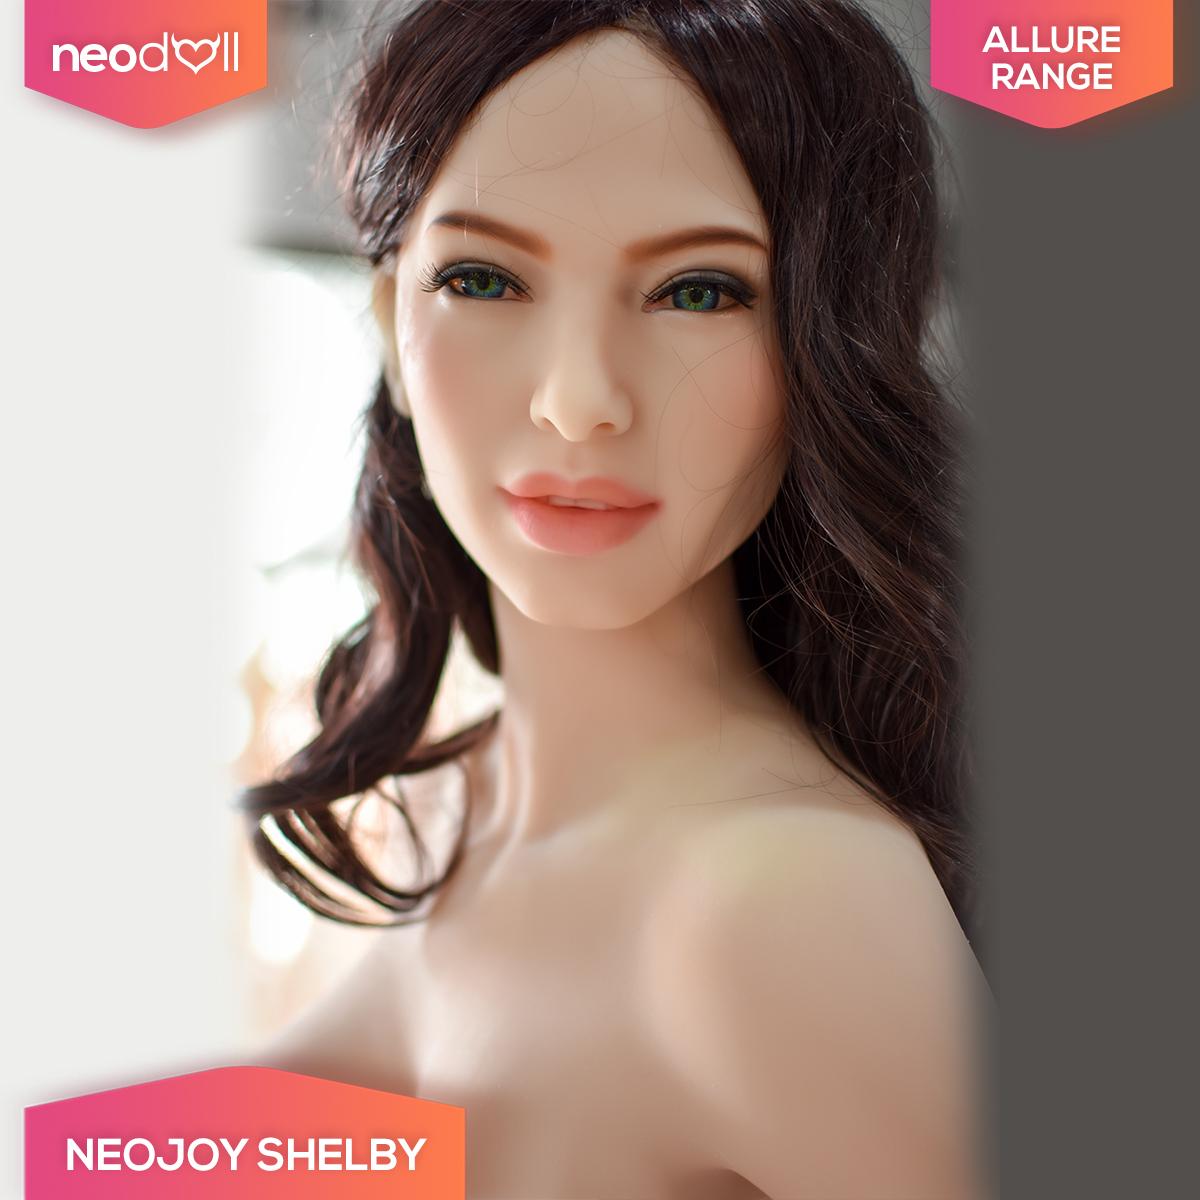 Neodoll Allure Shelby - Realistic Sex Doll - 165cm - Natural